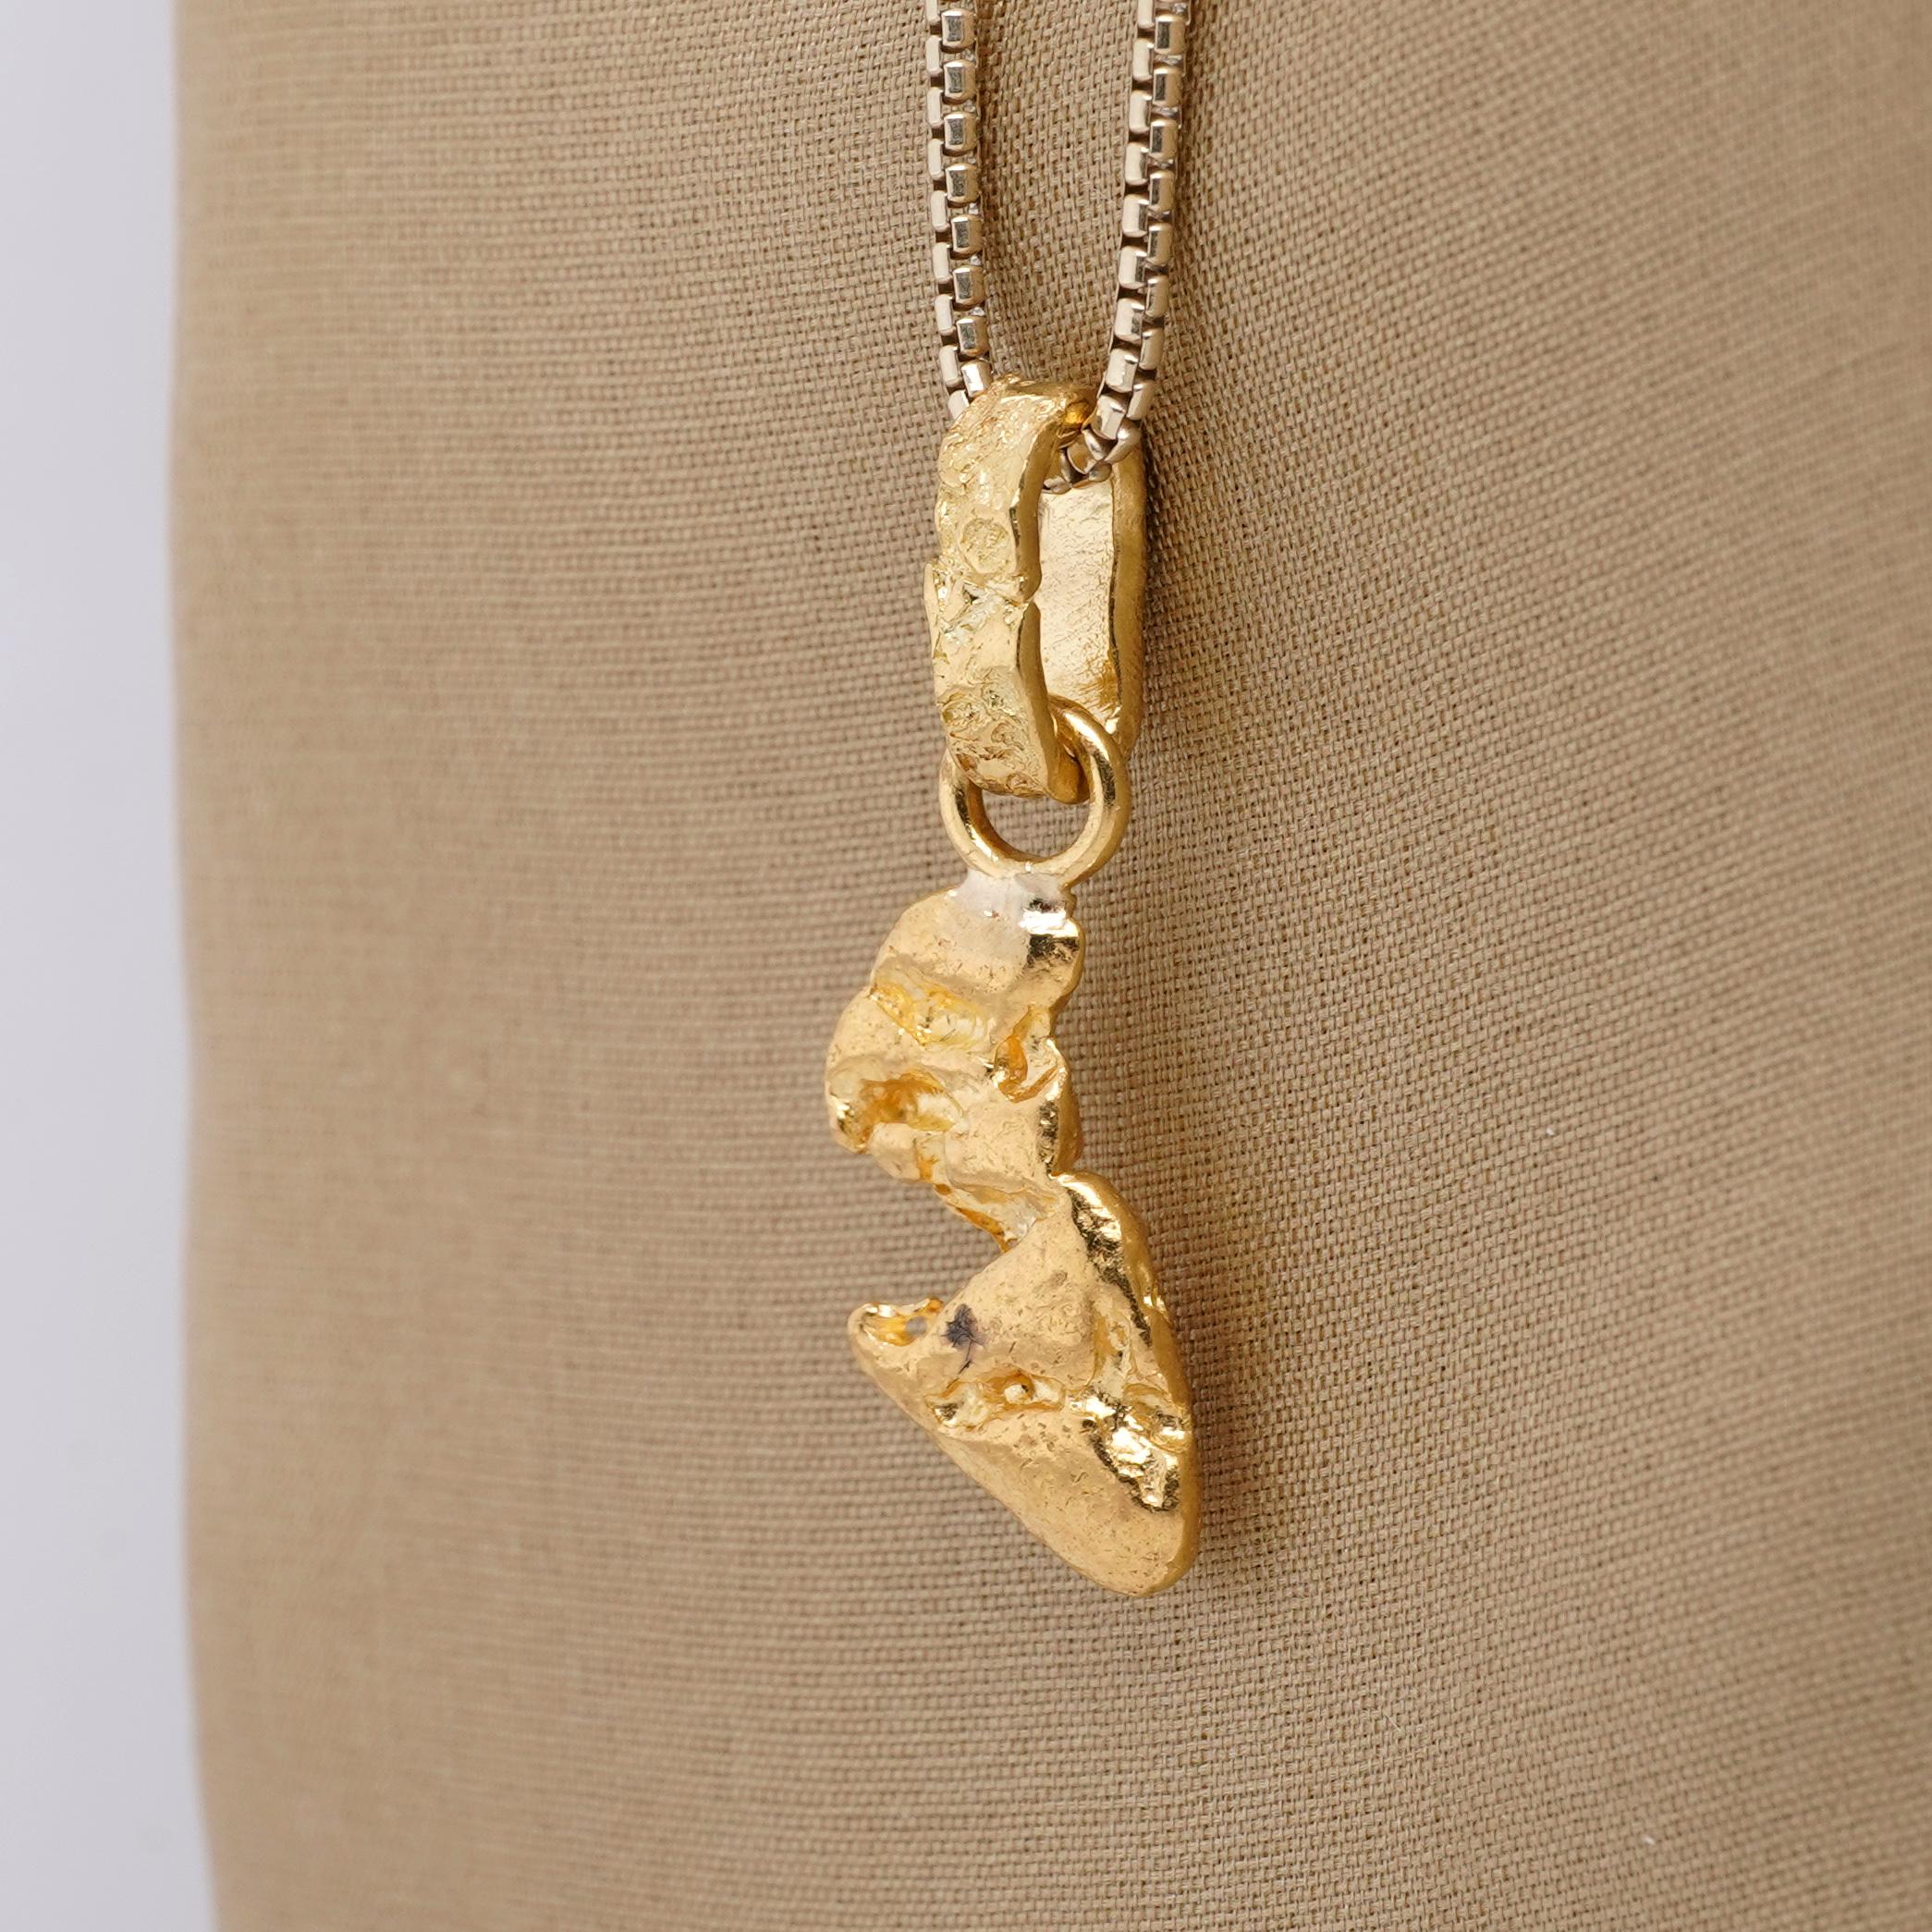 Raw, Solid, 24k Yellow Golden Nugget Pendant, 4.2 Grams from Australia In New Condition For Sale In Bozeman, MT